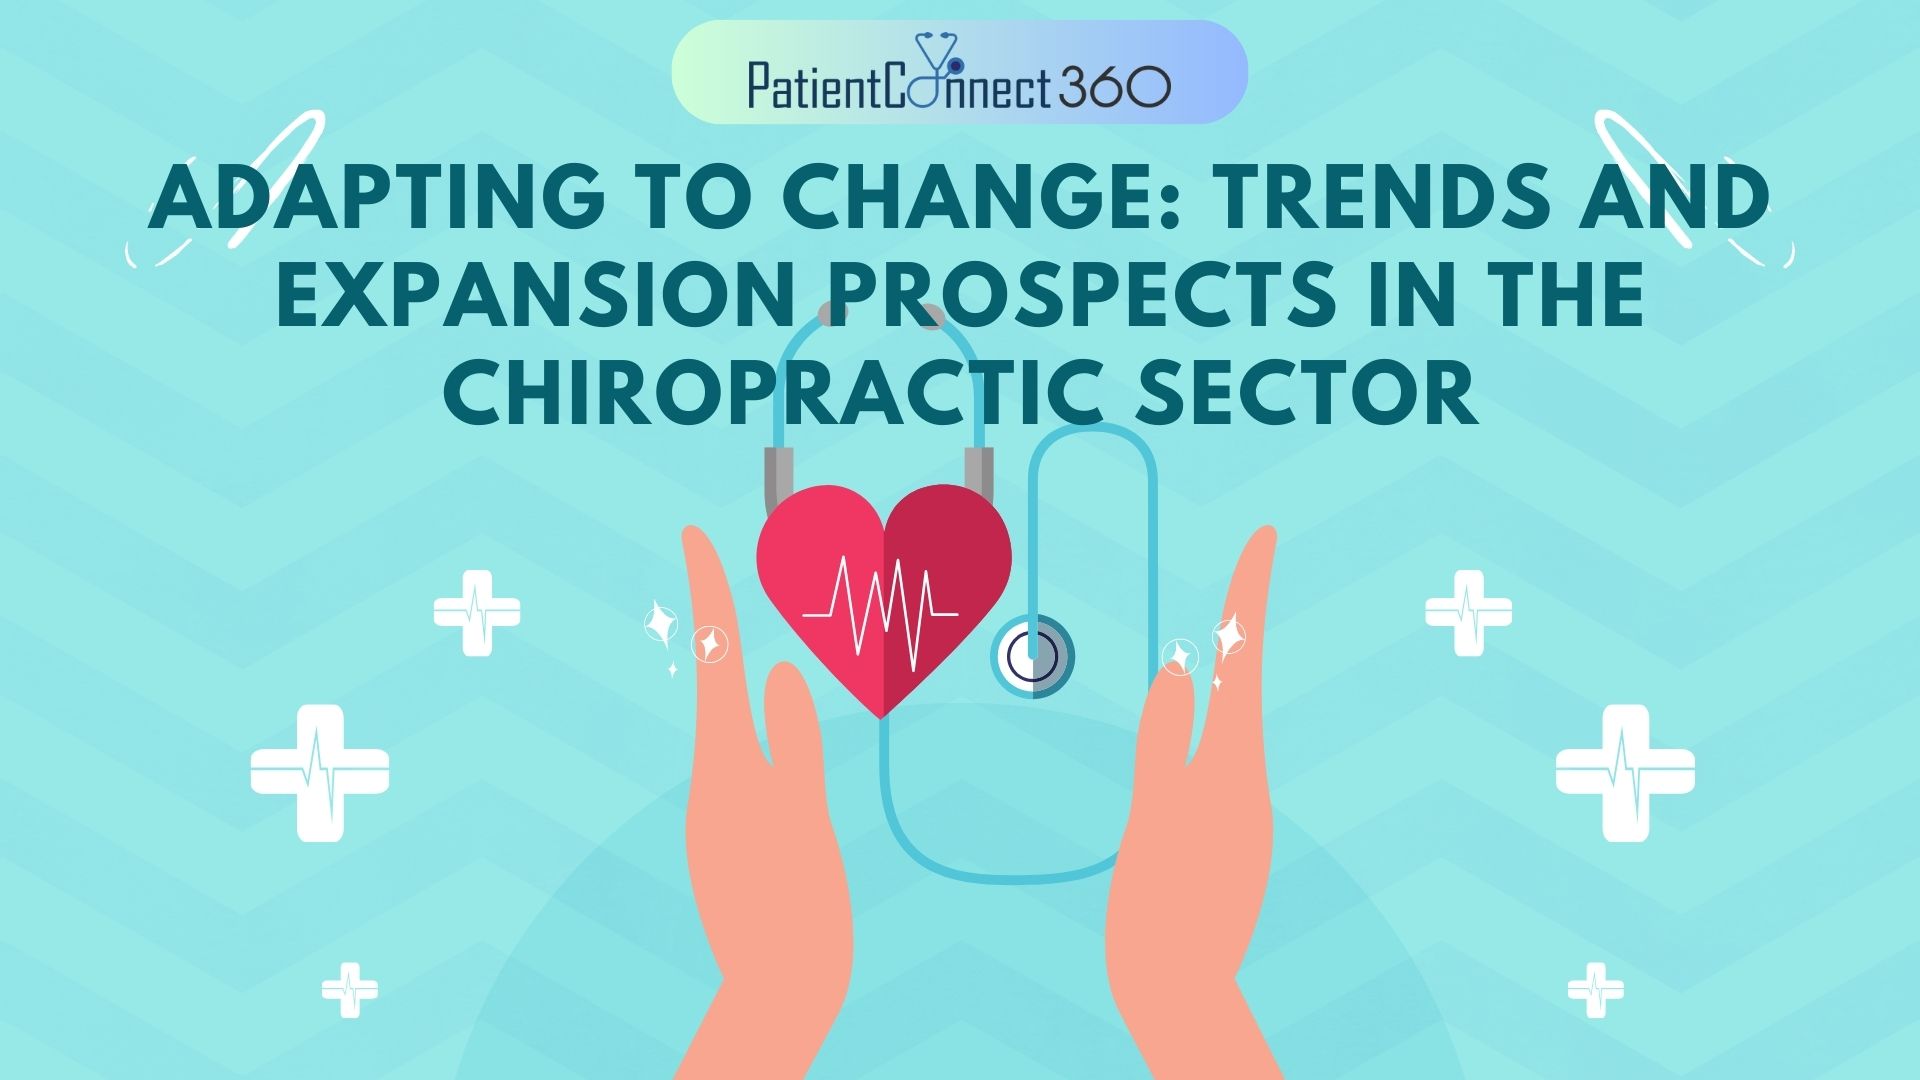 PatientCoRnect 360

ADAPTING TO CHANGE: TRENDS AND
EXPANSION PROSPECTS IN THE
CHIROPRACTIC SECTOR

 
 

>